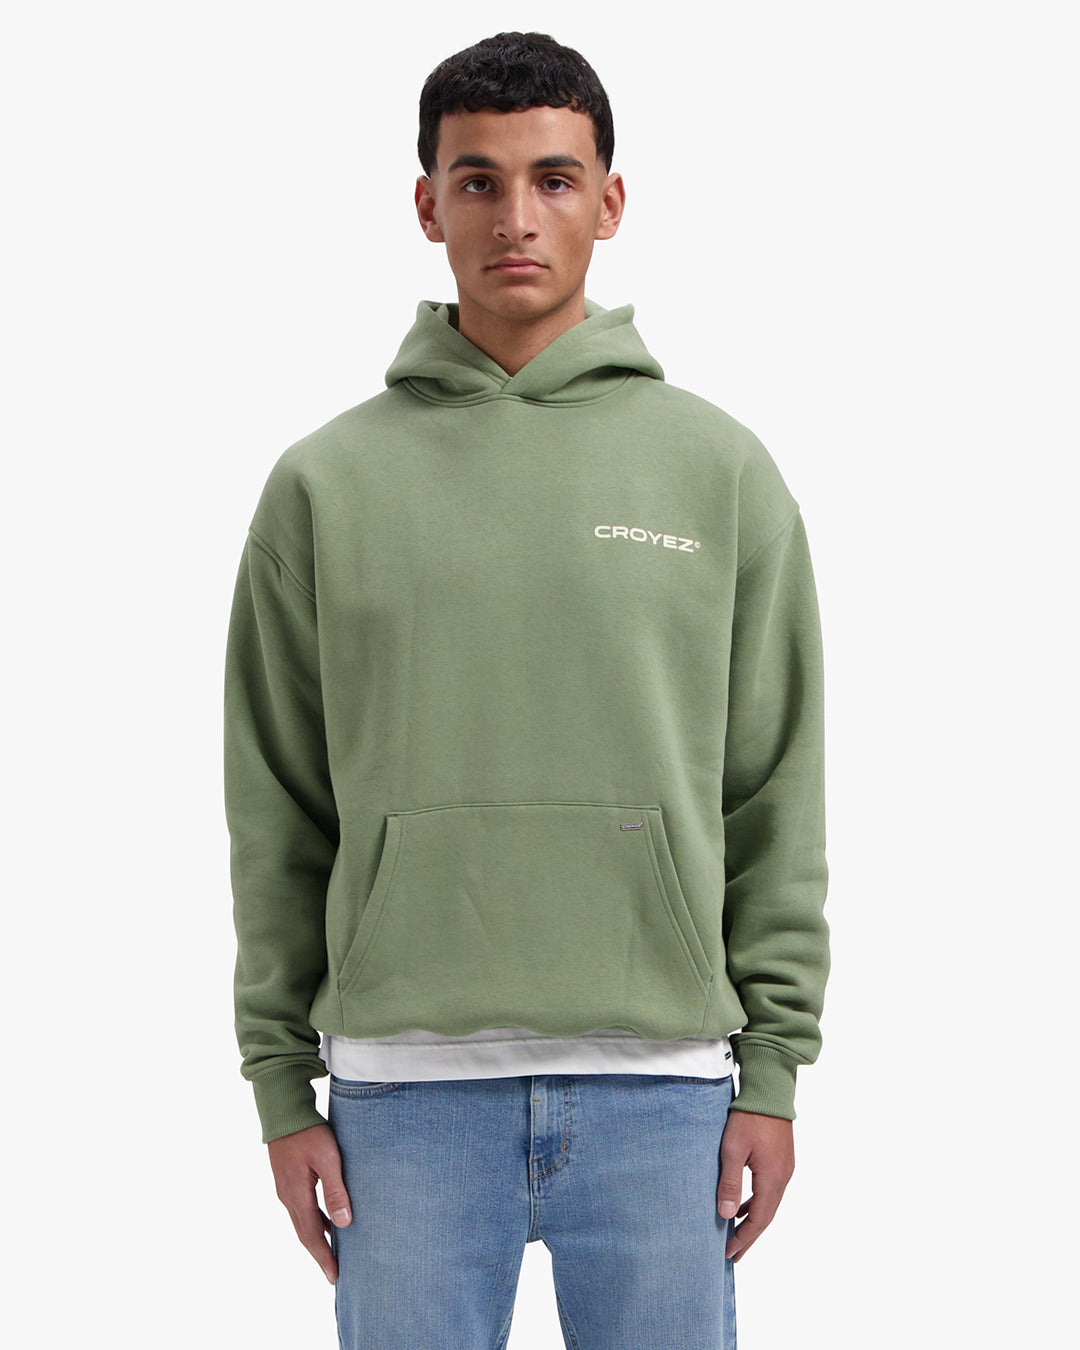 CROYEZ FAMILY OWNED BUSINESS HOODIE - WASHED OLIVE